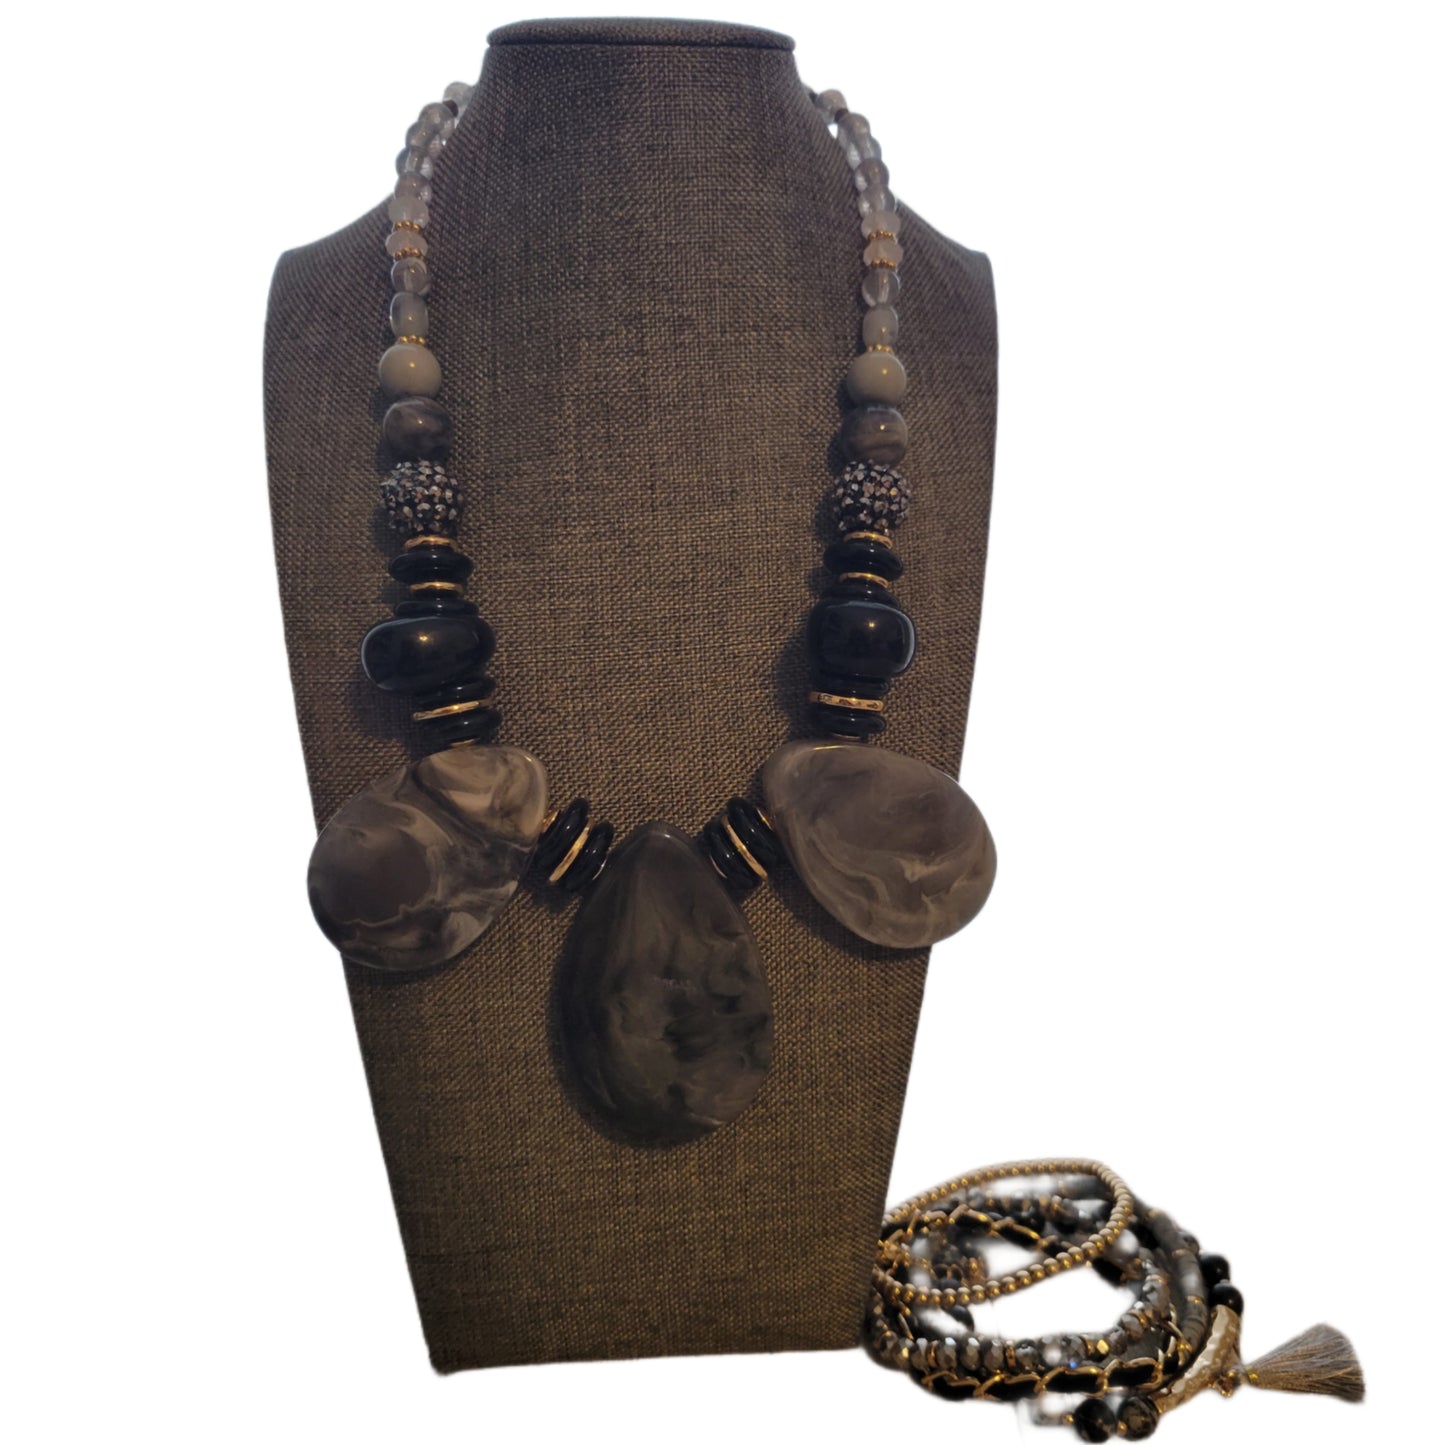 Gorgeous Grey, Black and Bling Necklace Set